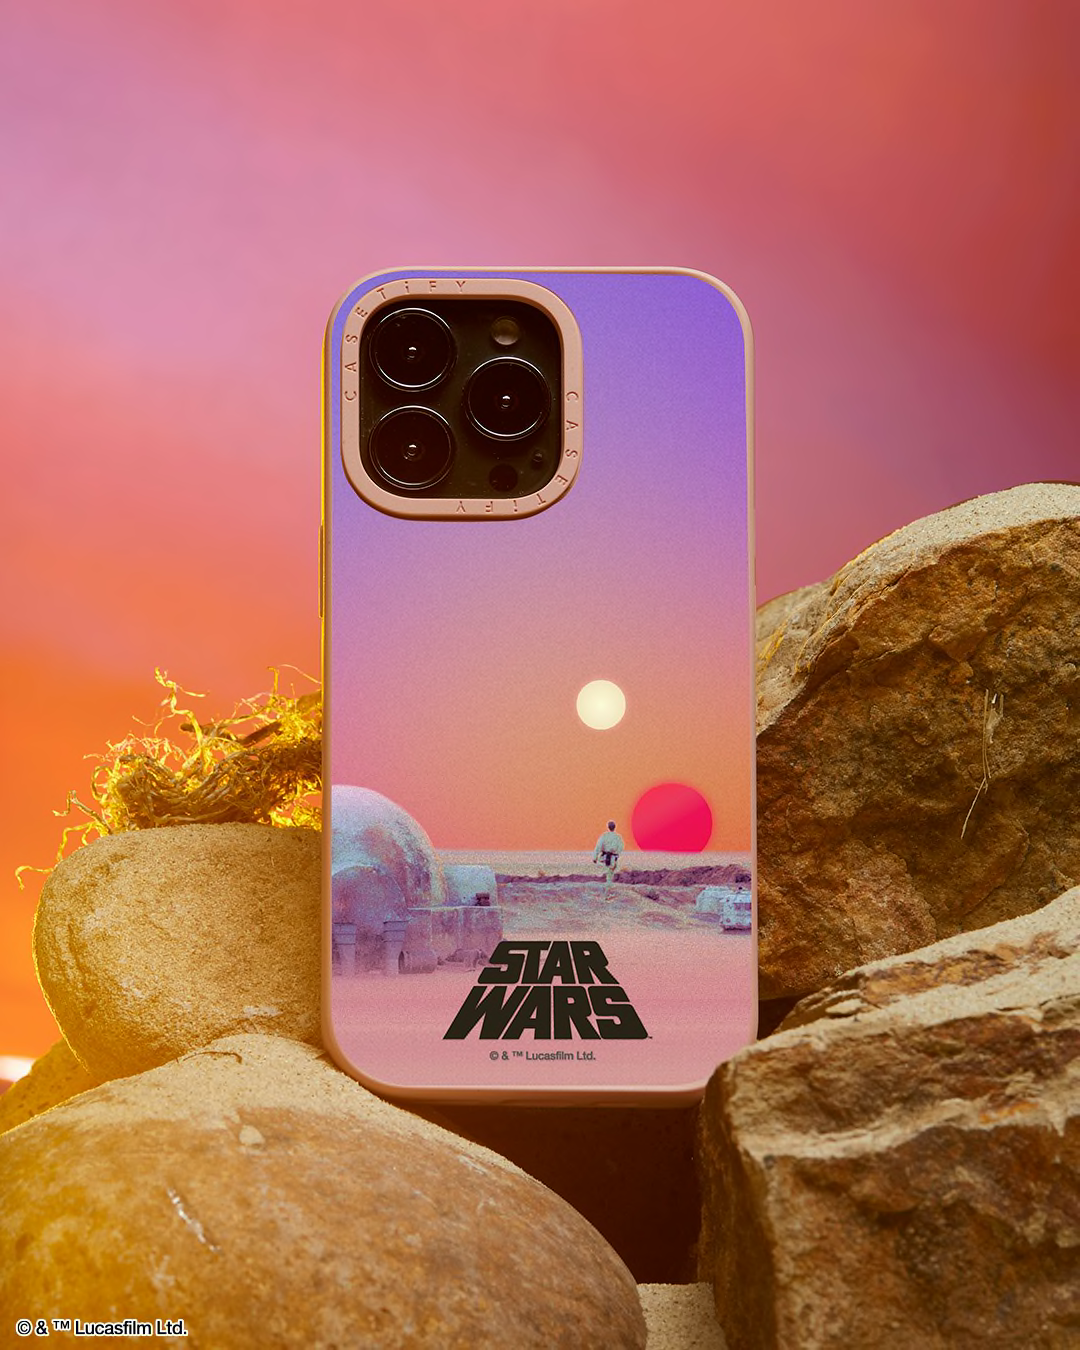 Discover the CASETiFY x Star Wars collection phone cases including the Tatooine sunset case.